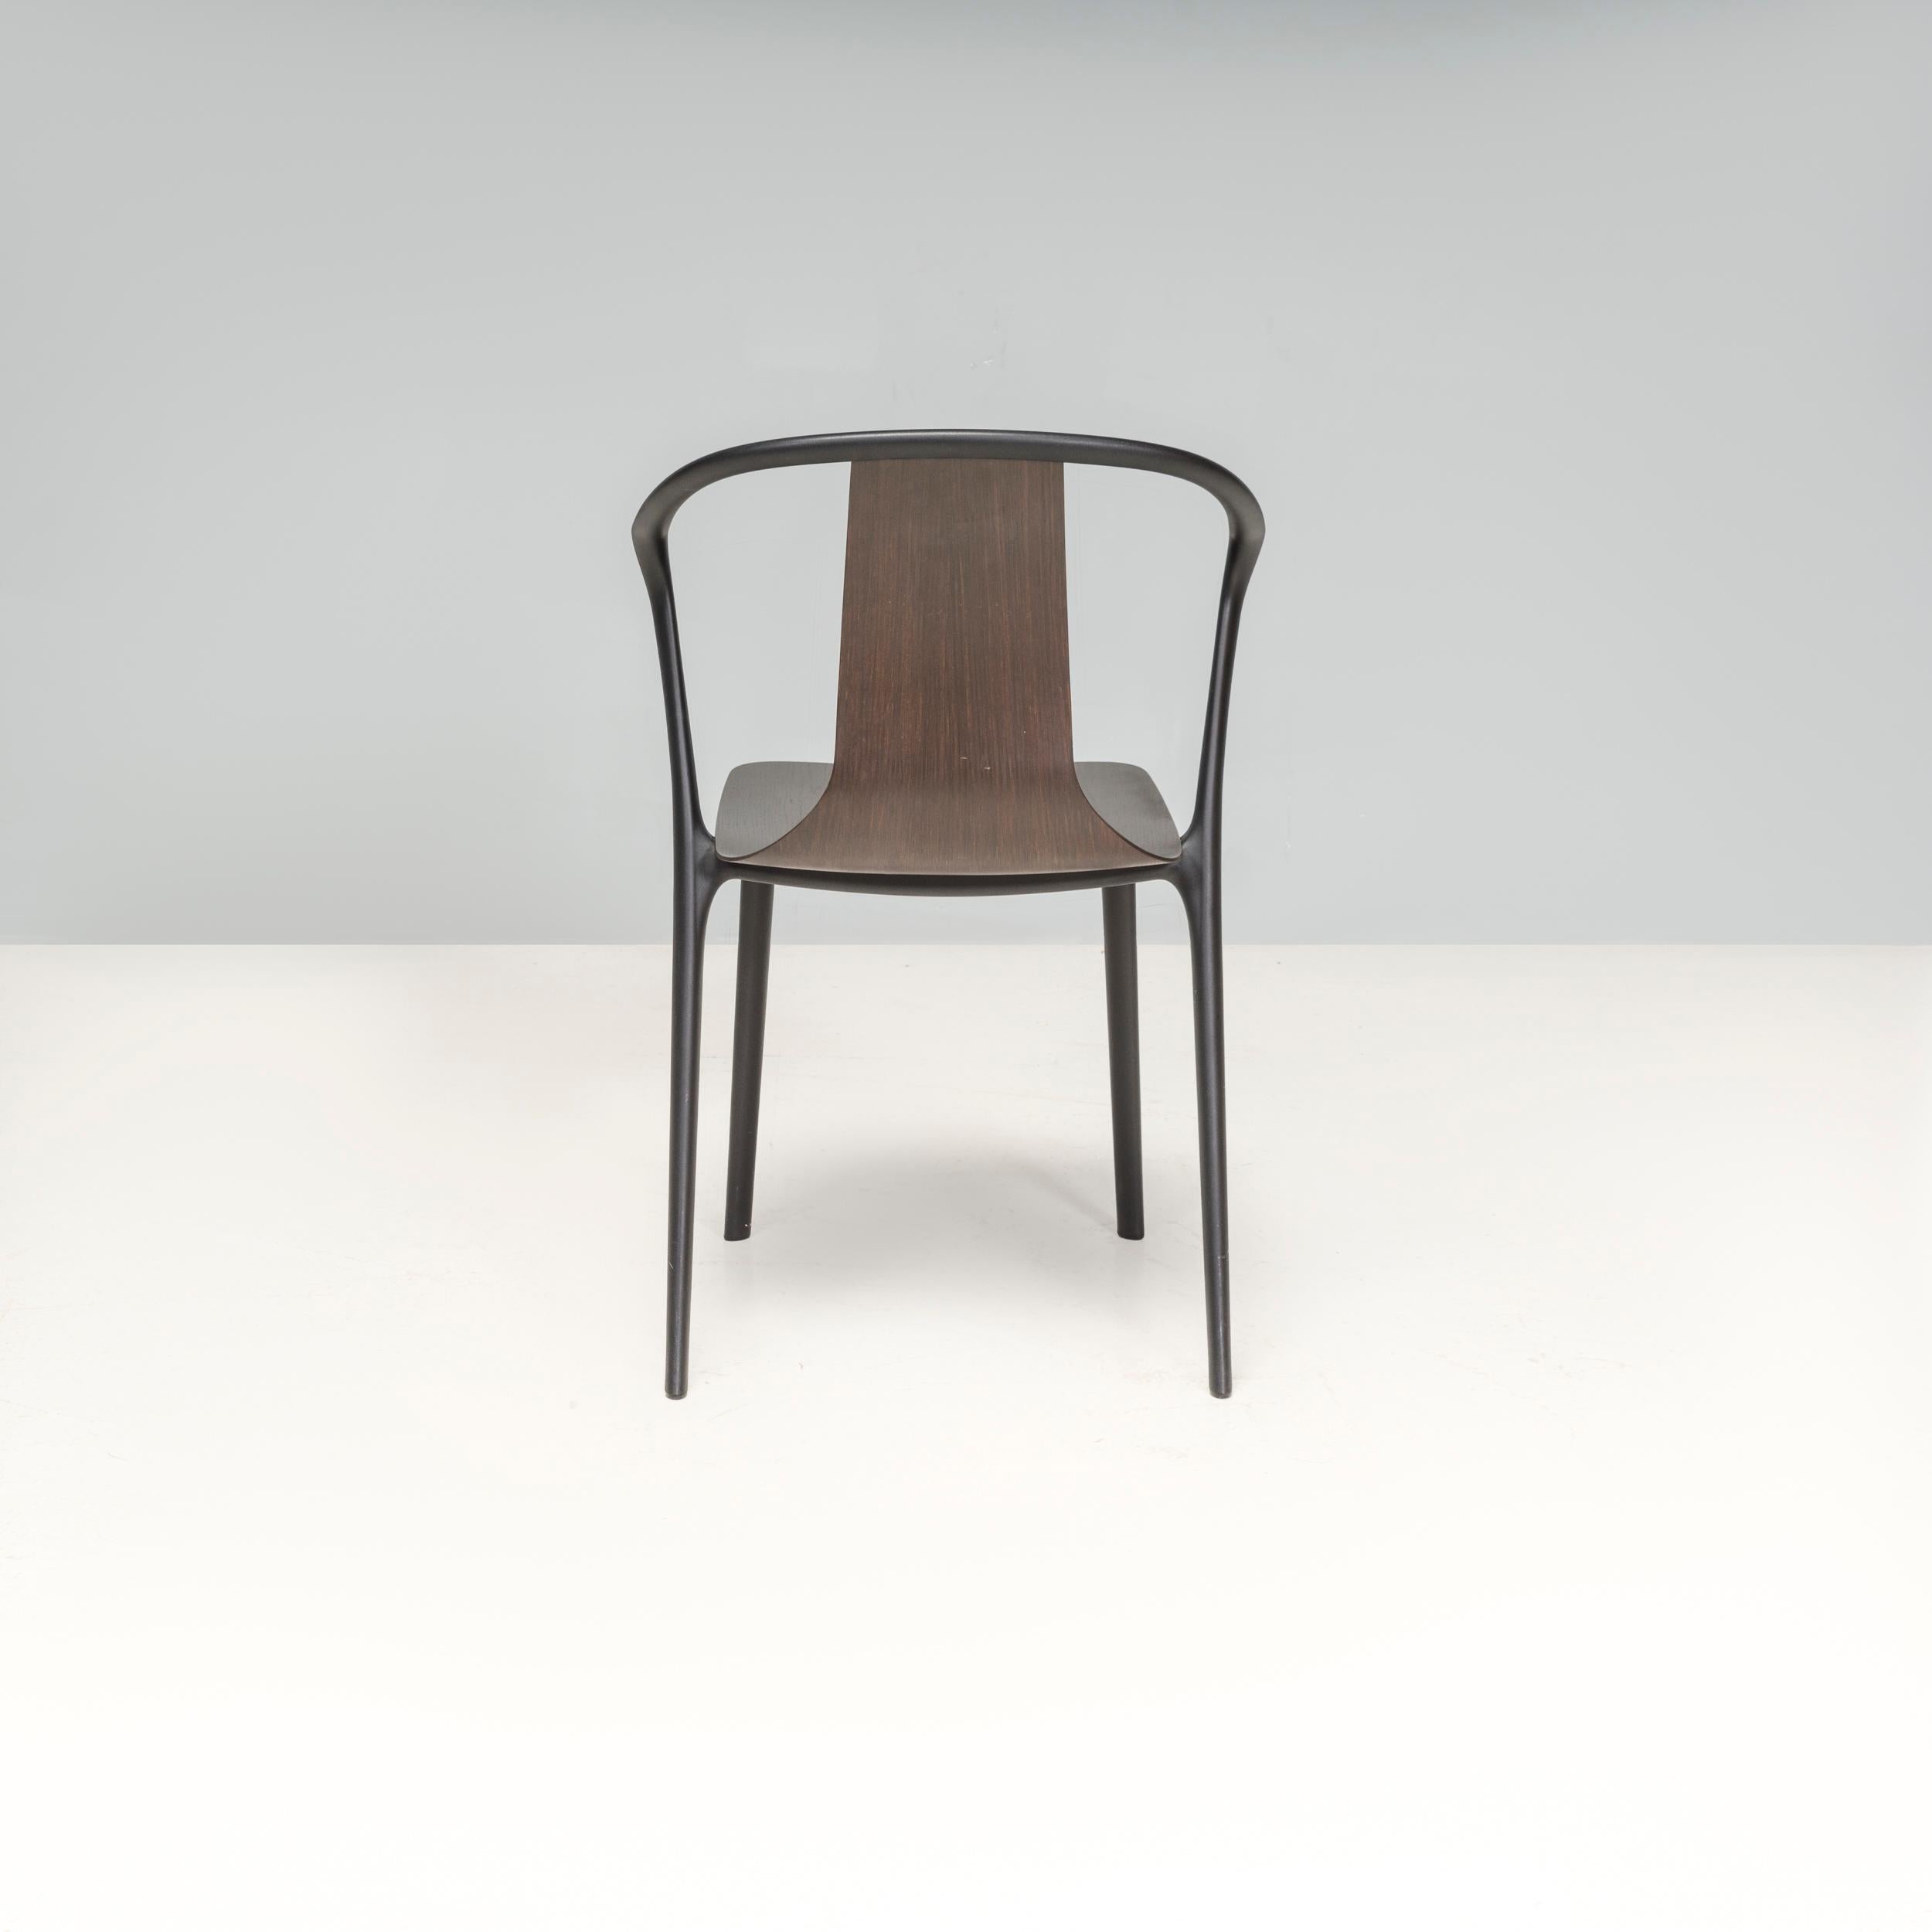 Originally designed in 2015 by Ronan & Erwan Bouroullec for Vitra, the Belleville dining chair give the classic bistro chair a modern update. 

Constructed from a moulded polyamide frame in a black finish, the chairs have a curvaceous and sculptural